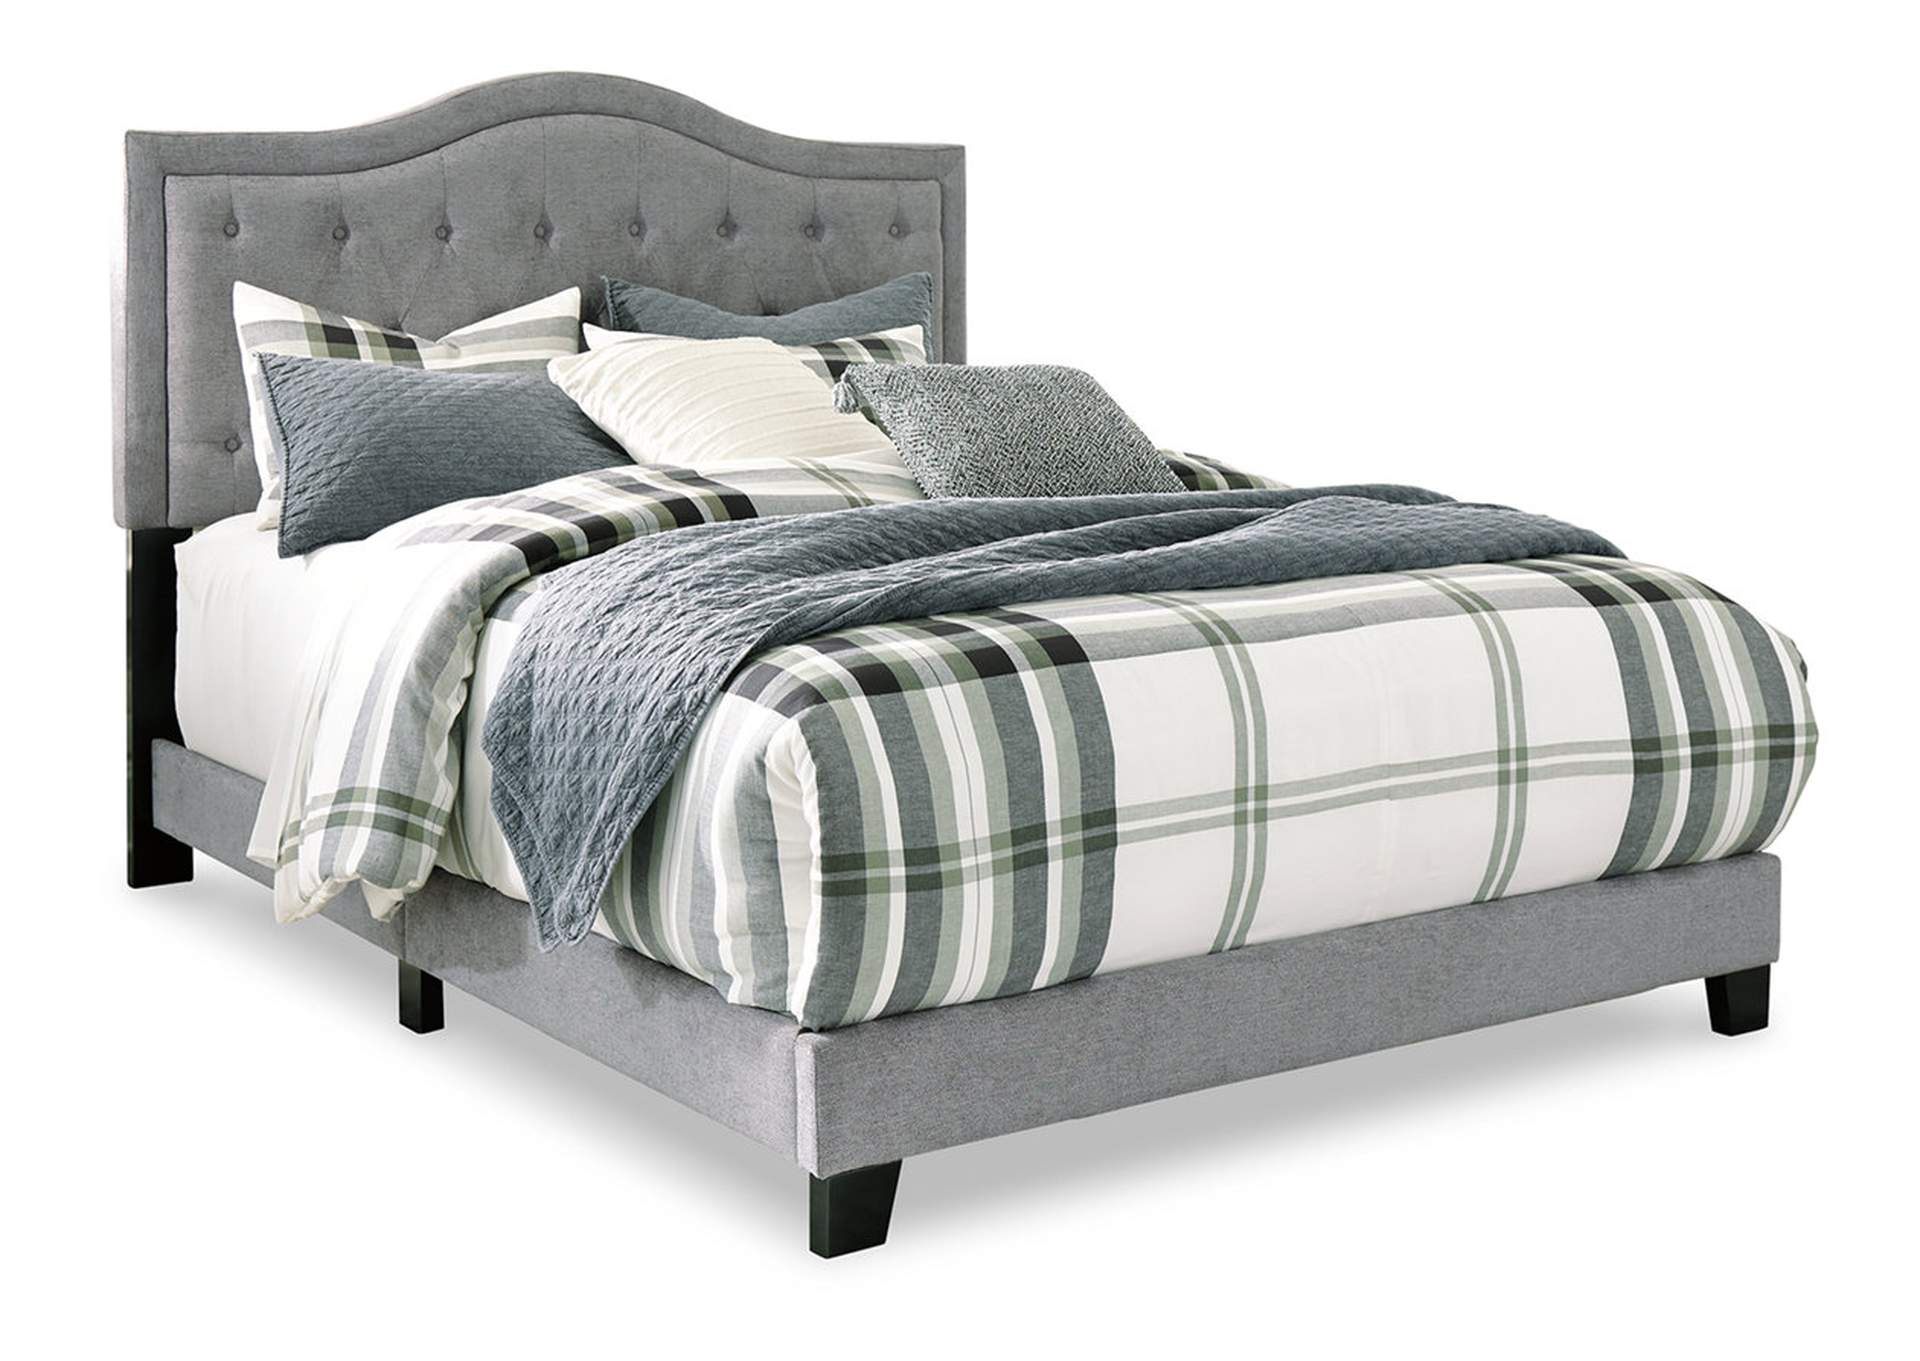 Jerary Queen Upholstered Bed,Signature Design By Ashley